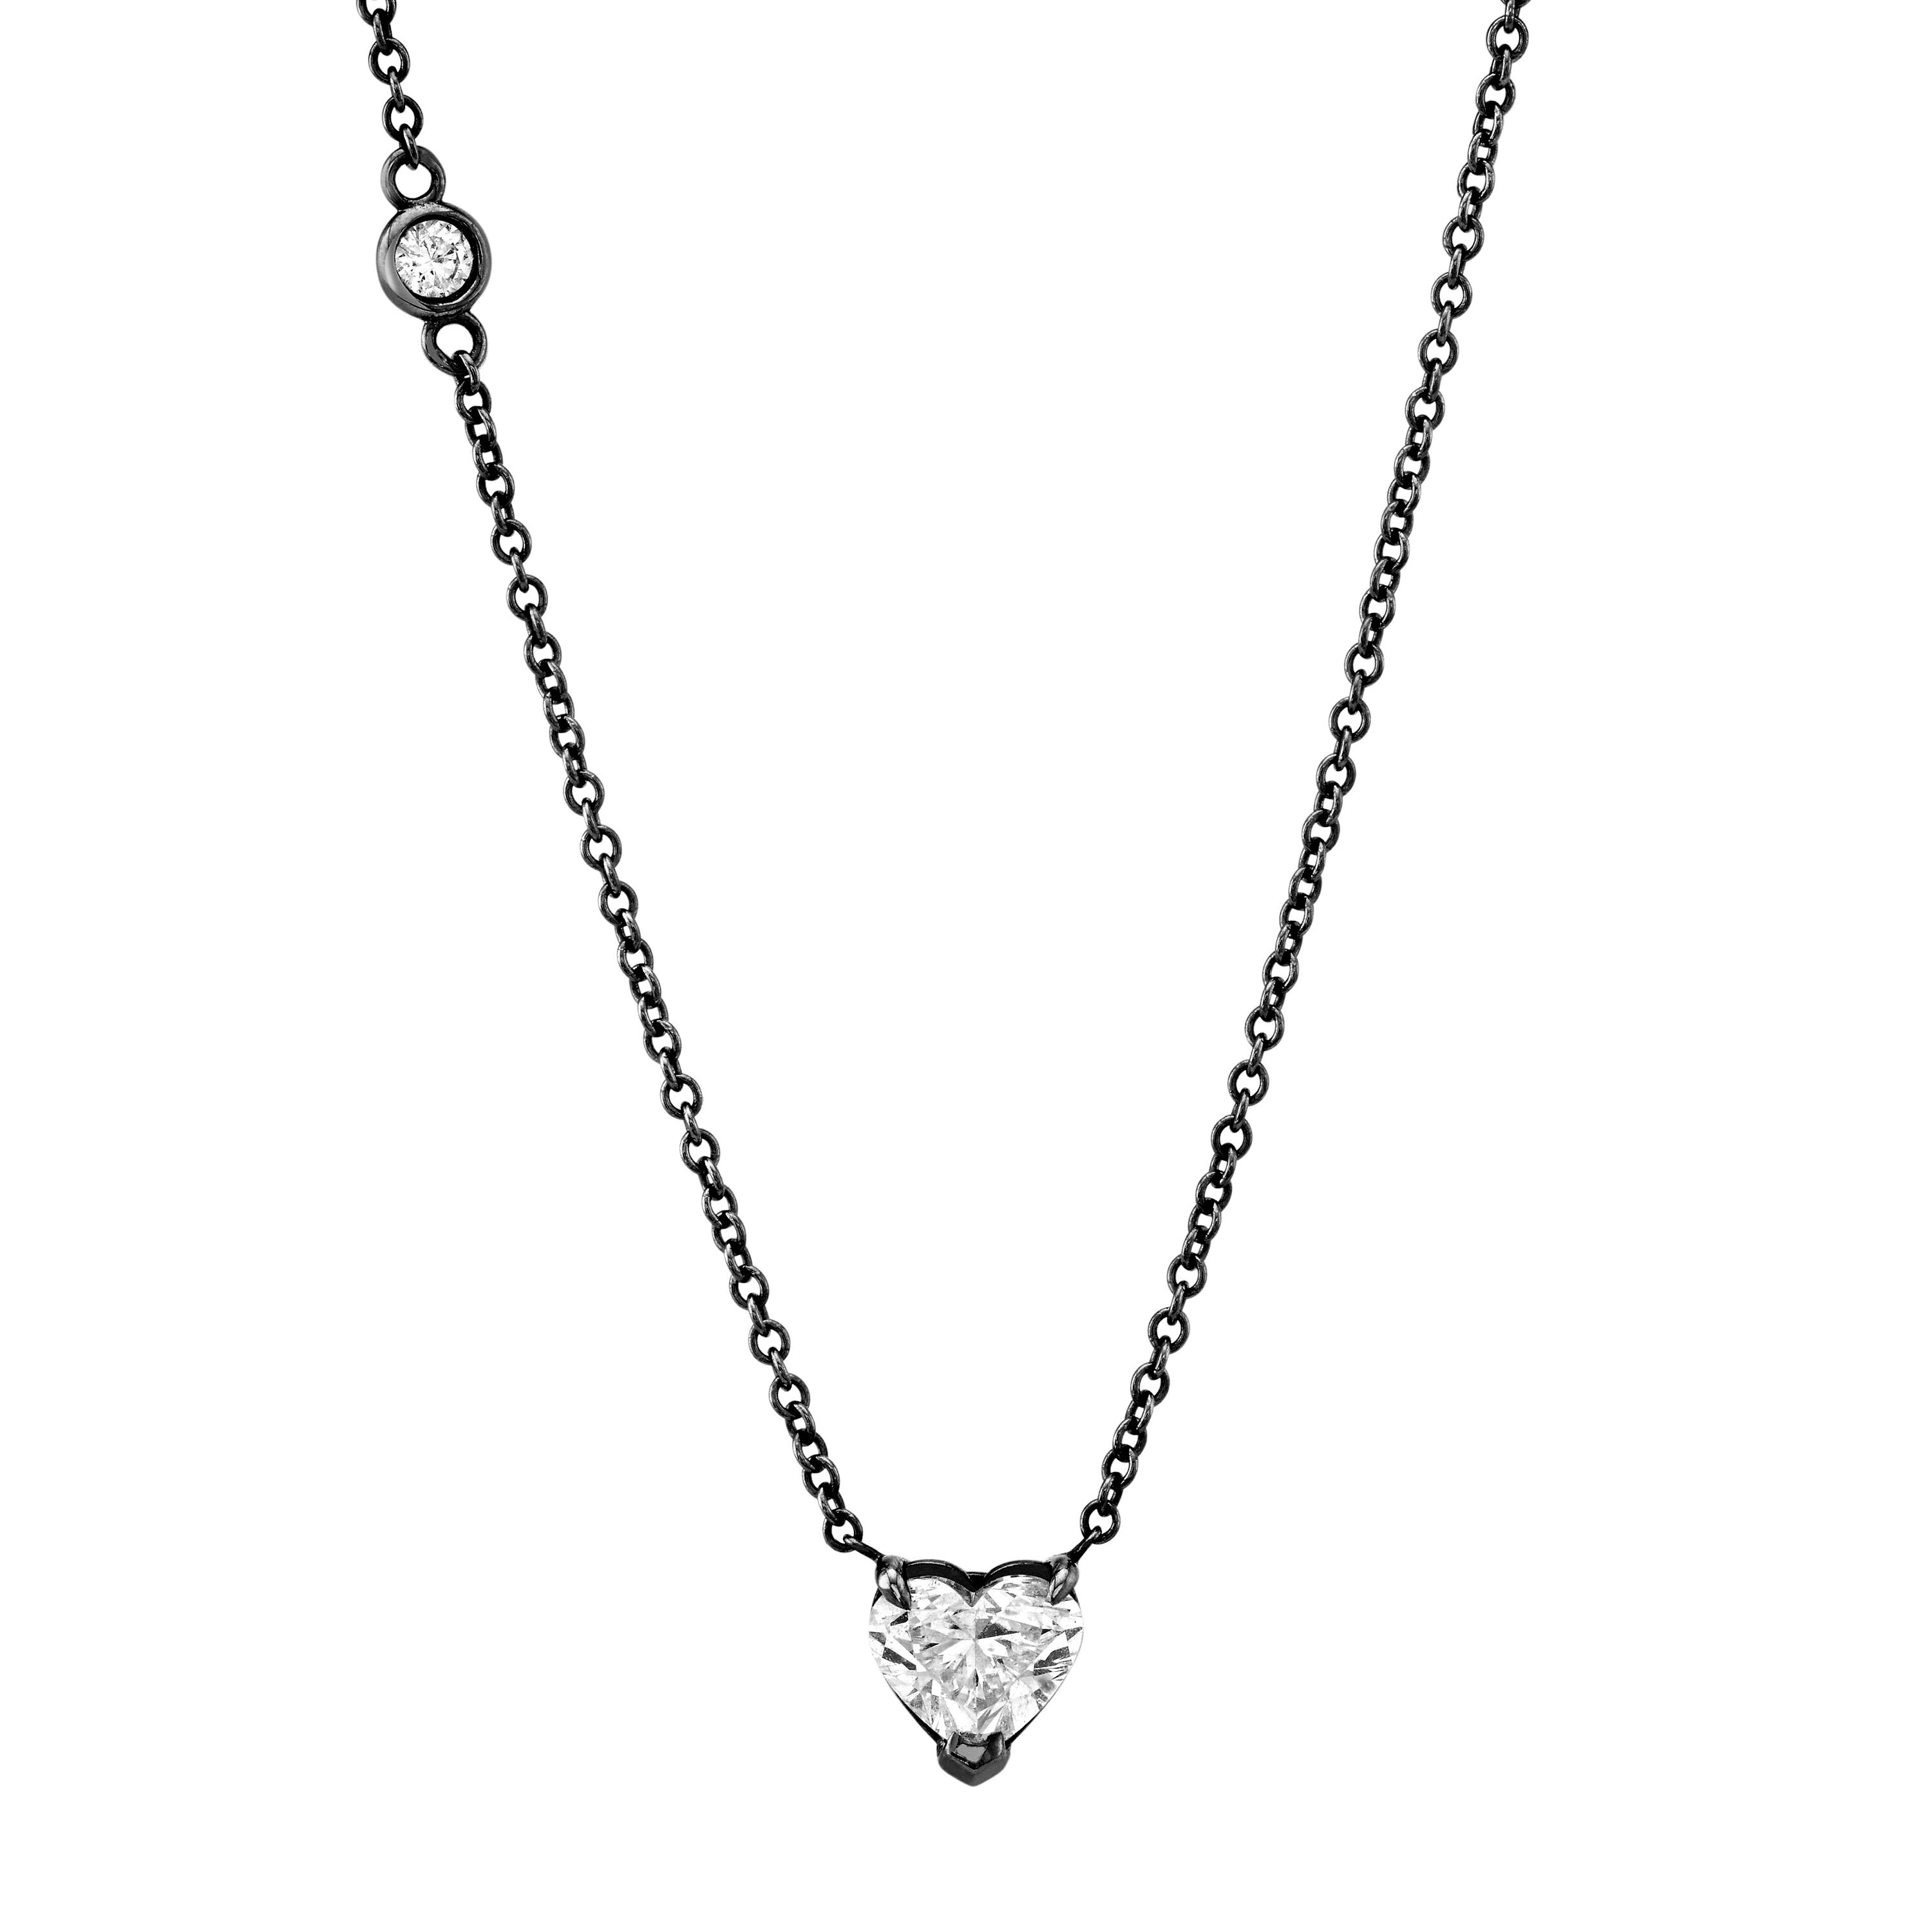 1/4 Carat (Ctw) Black & White Diamond Heart Pendant Necklace in Sterling  Silver with Chain - Walmart.com